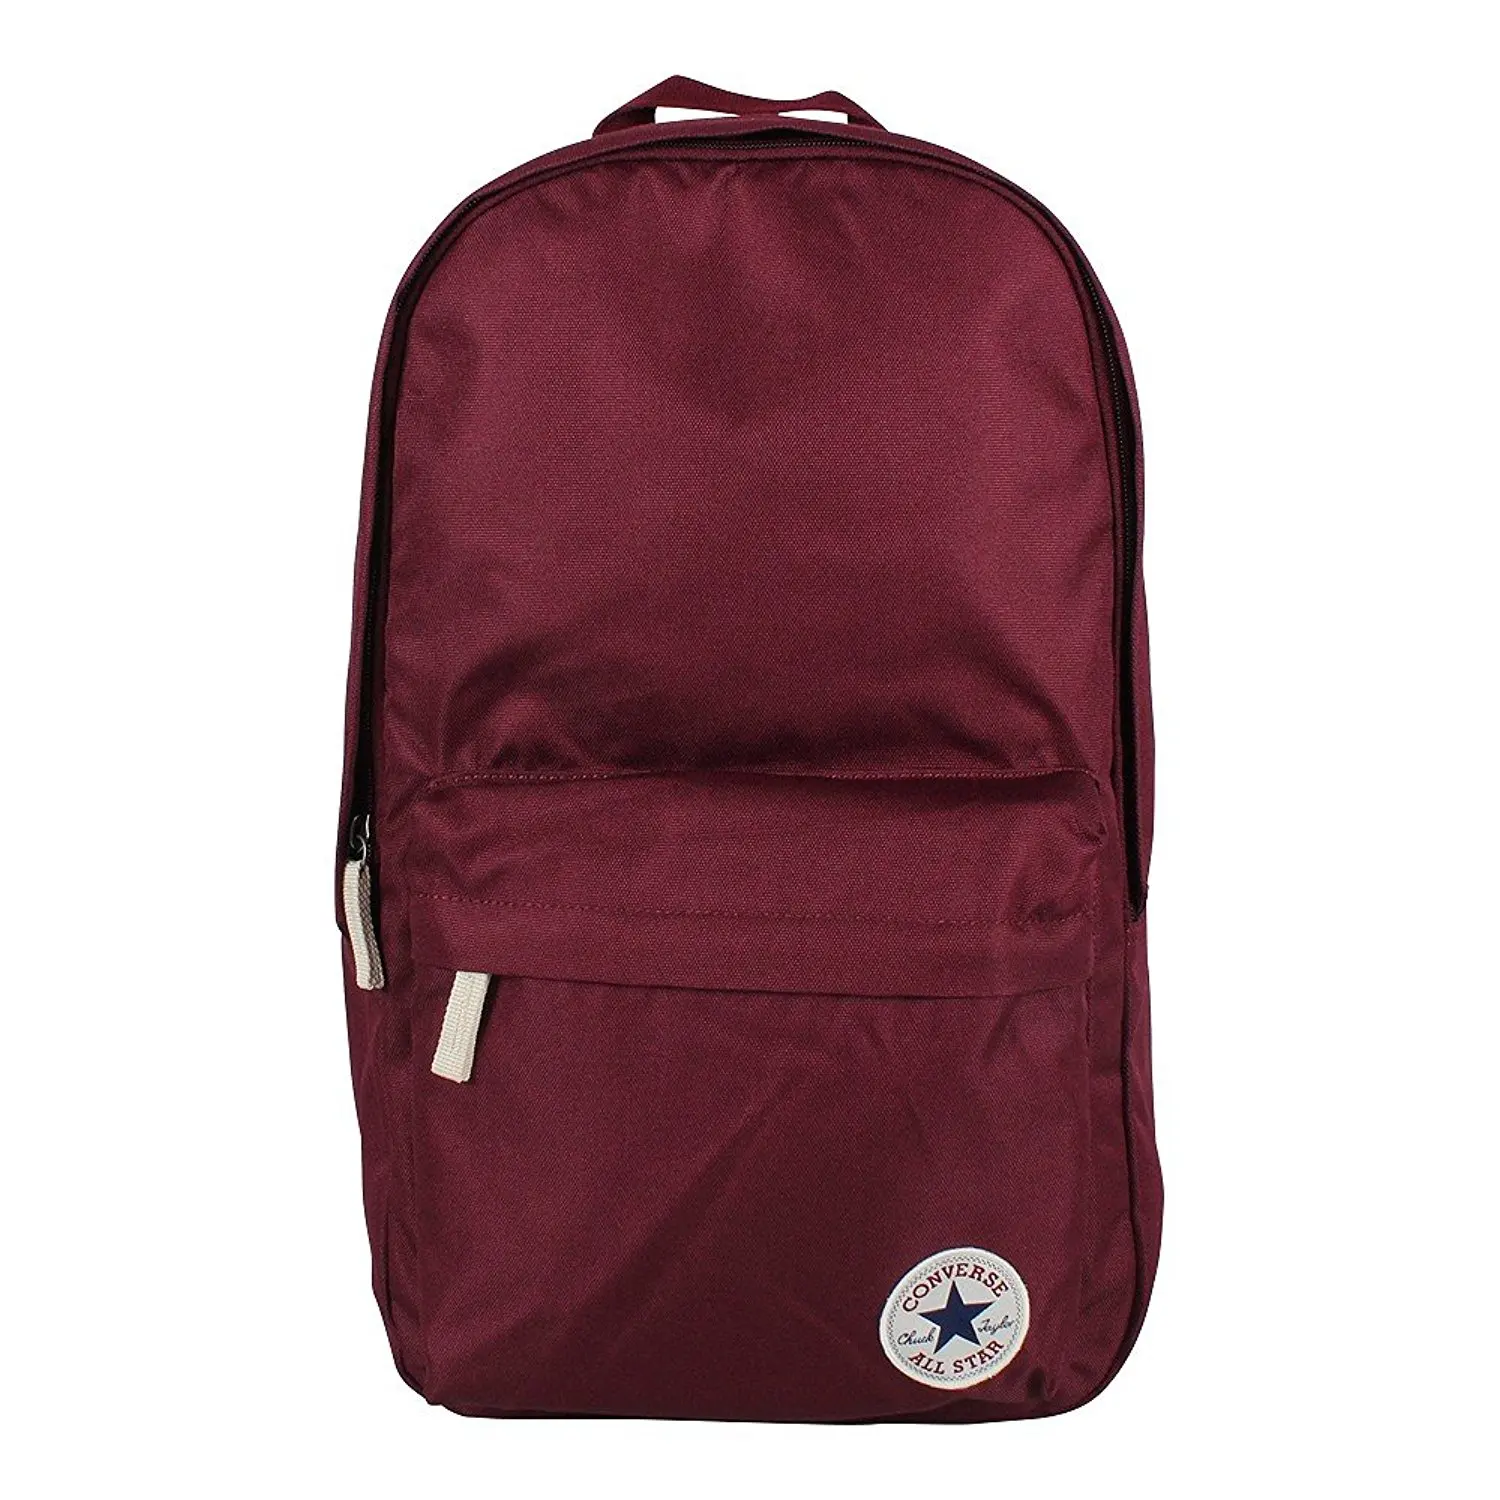 converse backpack price